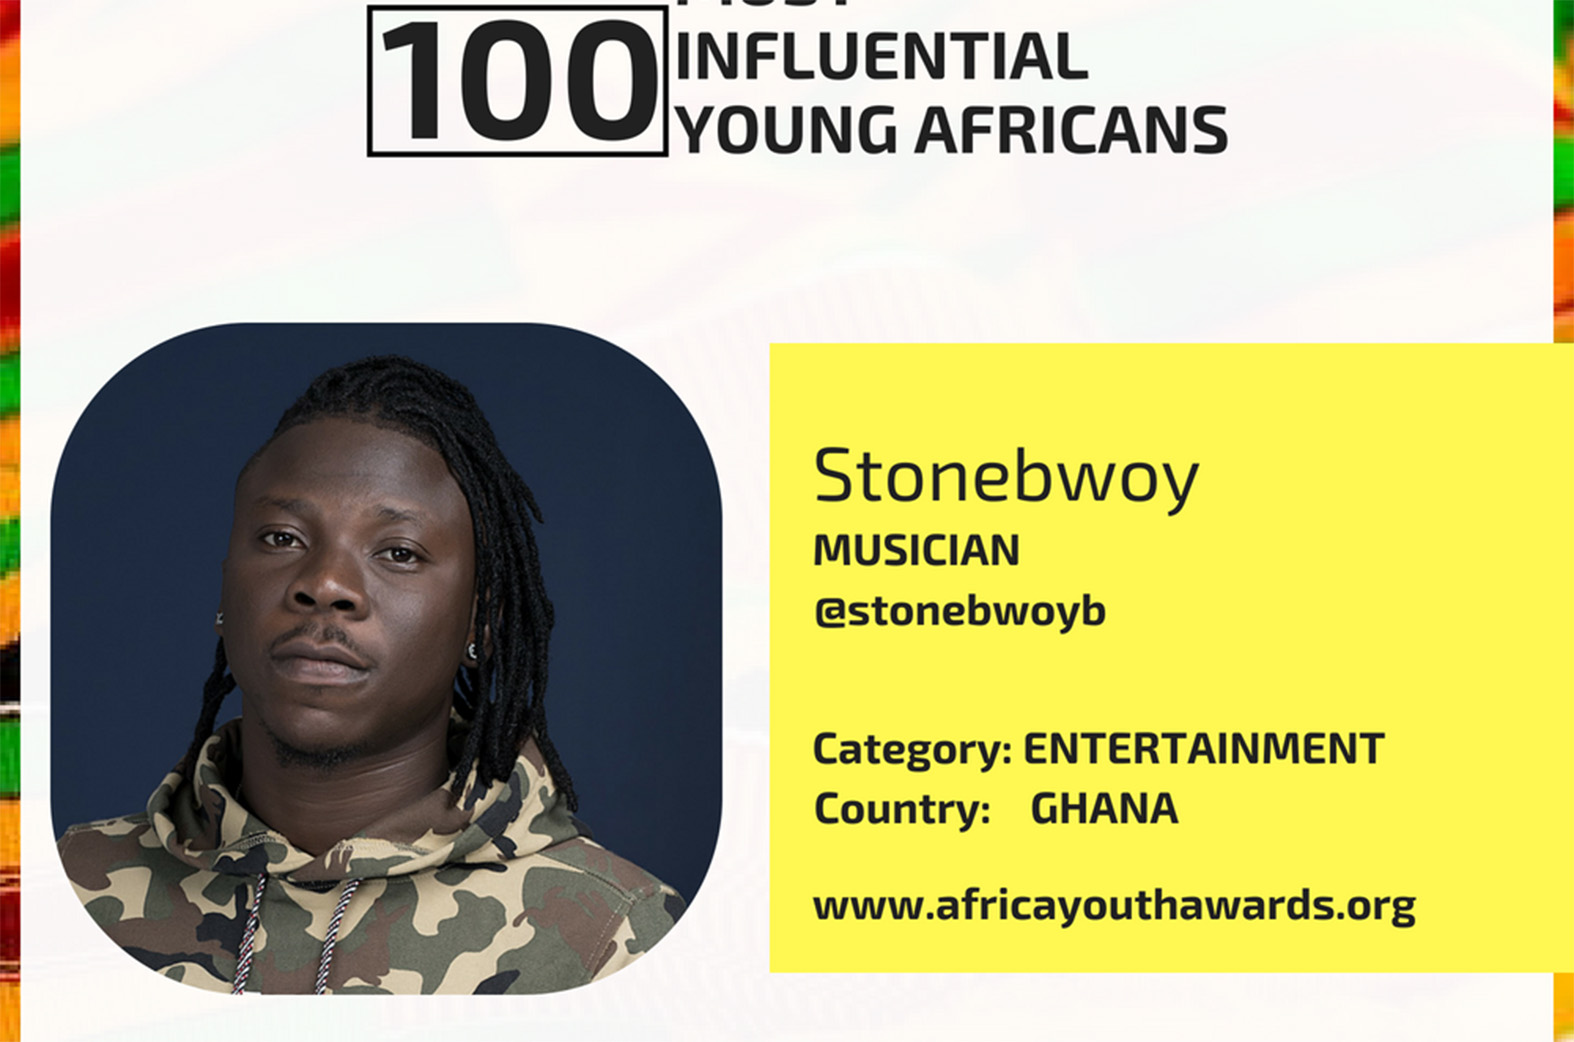 Stonebwoy makes list of 100 Most Influential Young Africans for 2018